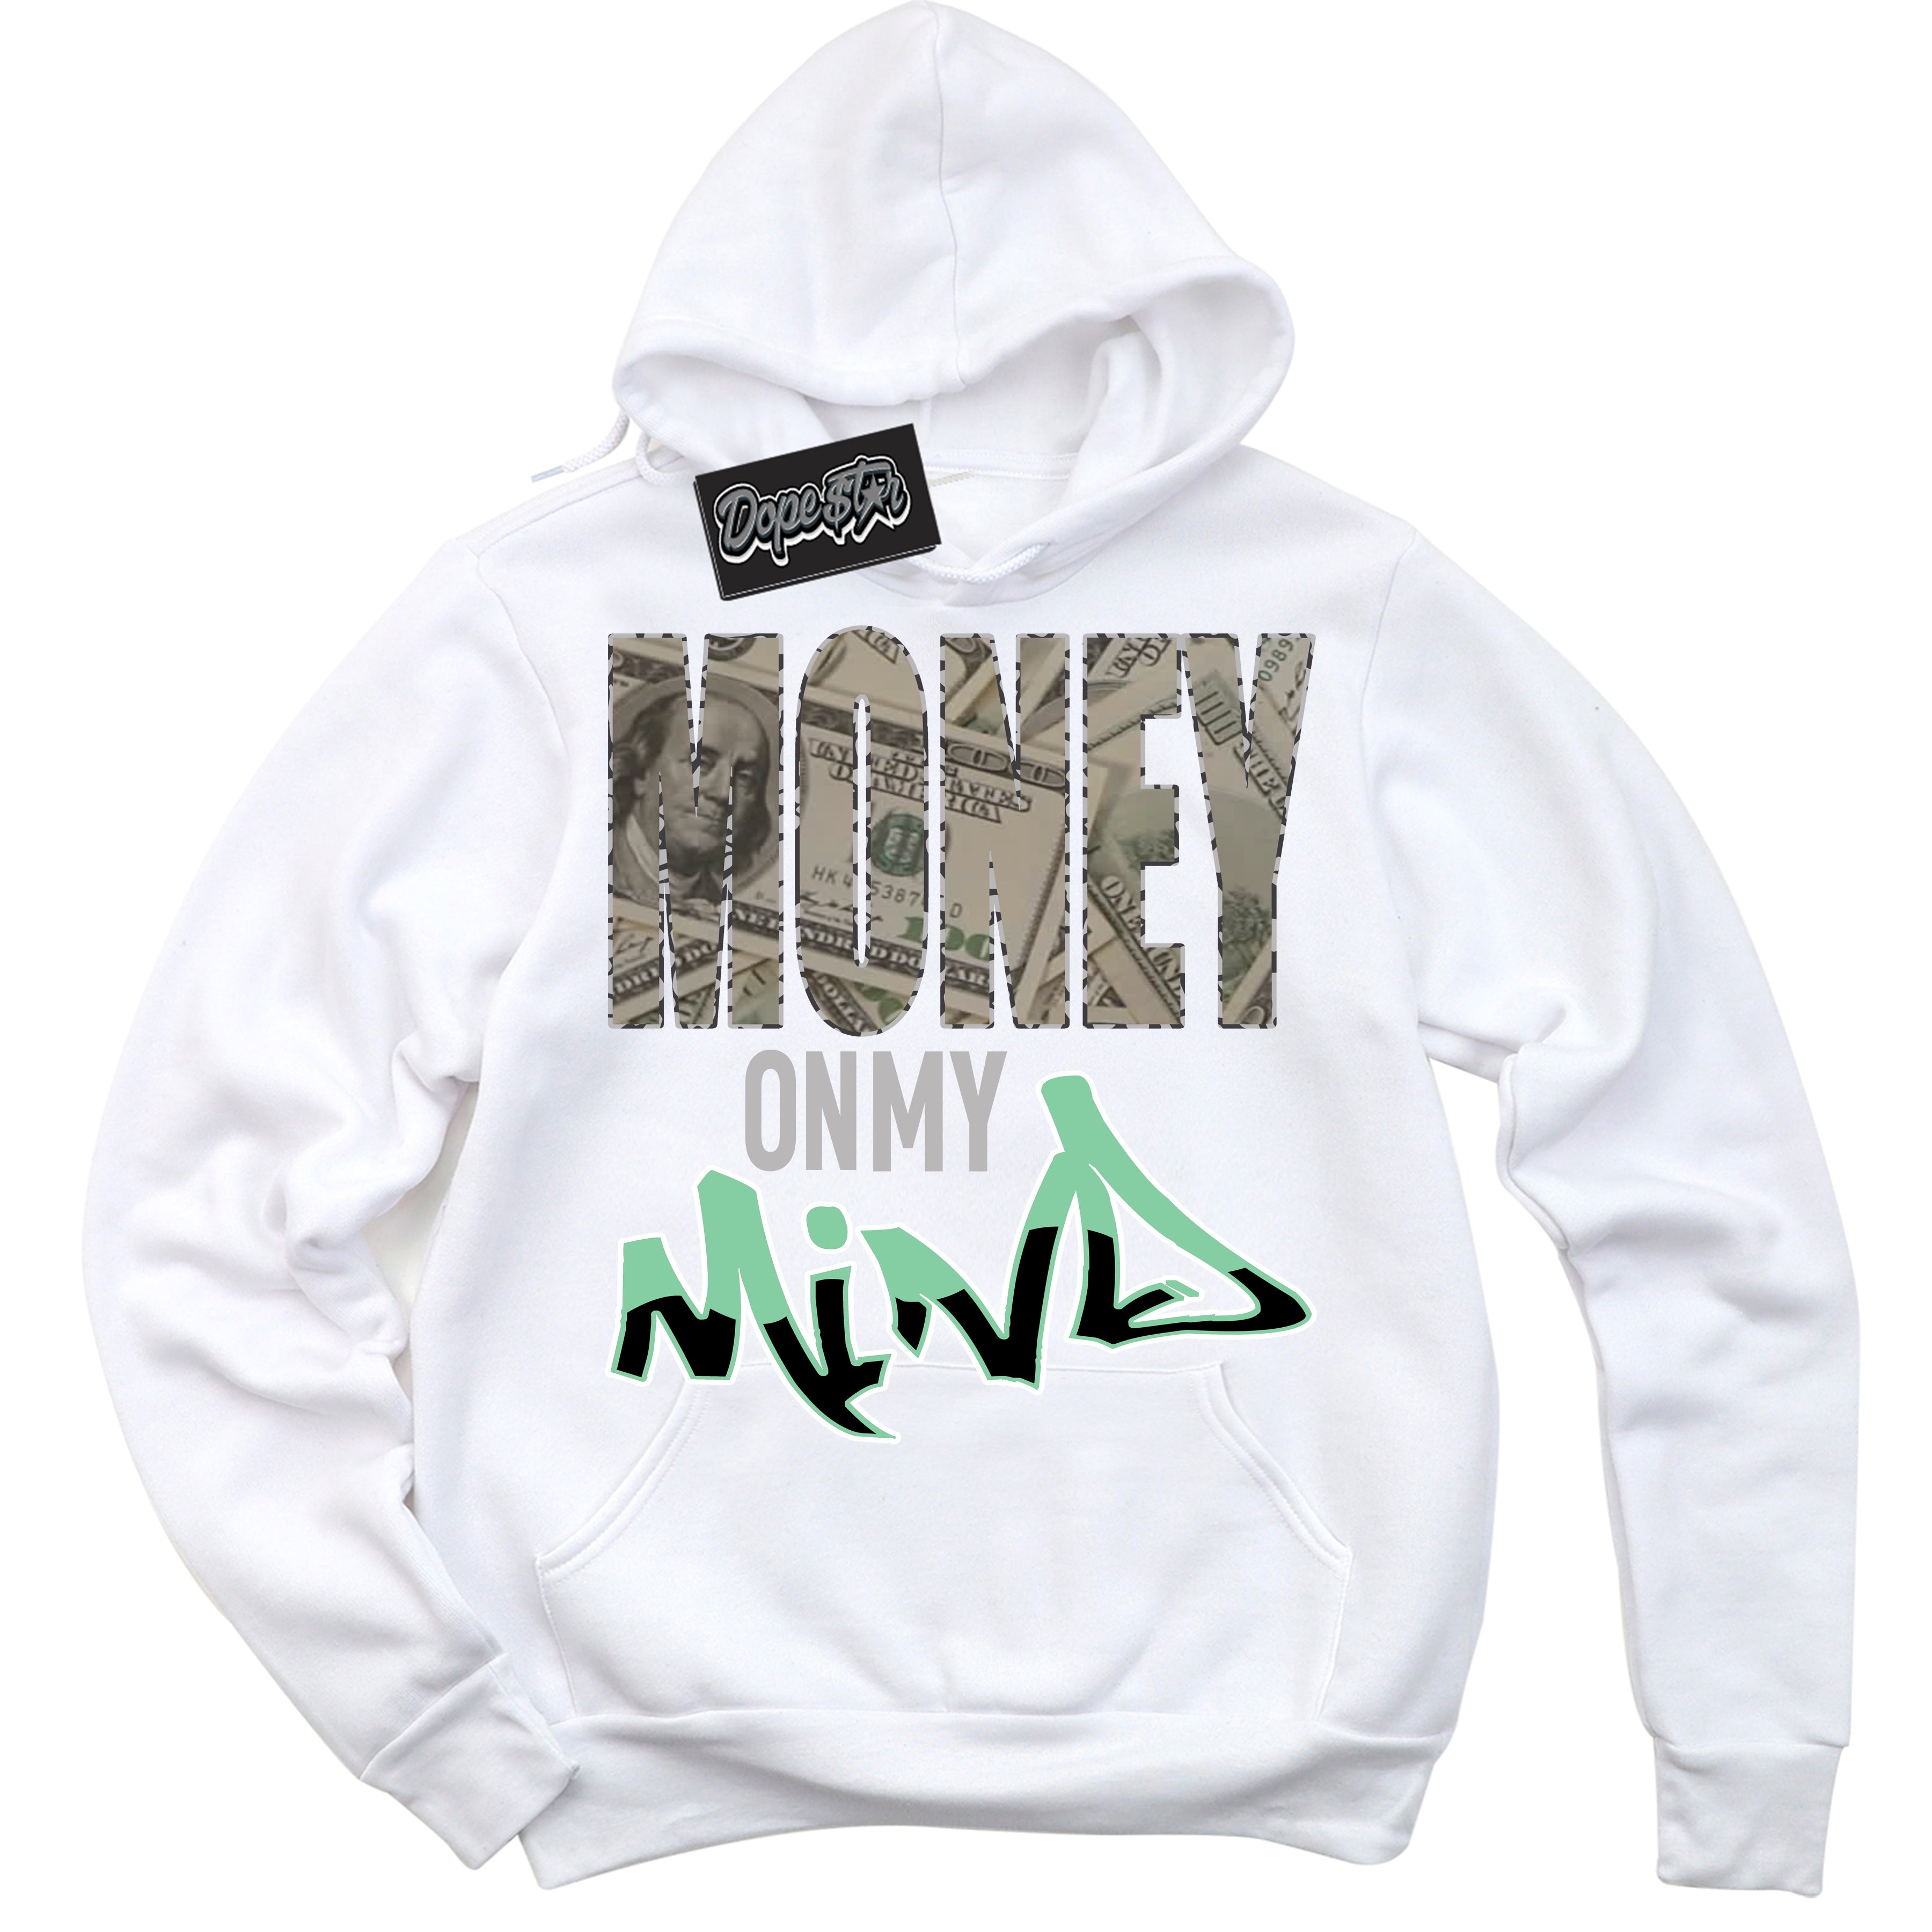 Cool White Graphic DopeStar Hoodie with “ Money On My Mind “ print, that perfectly matches Green Glow 3s sneakers